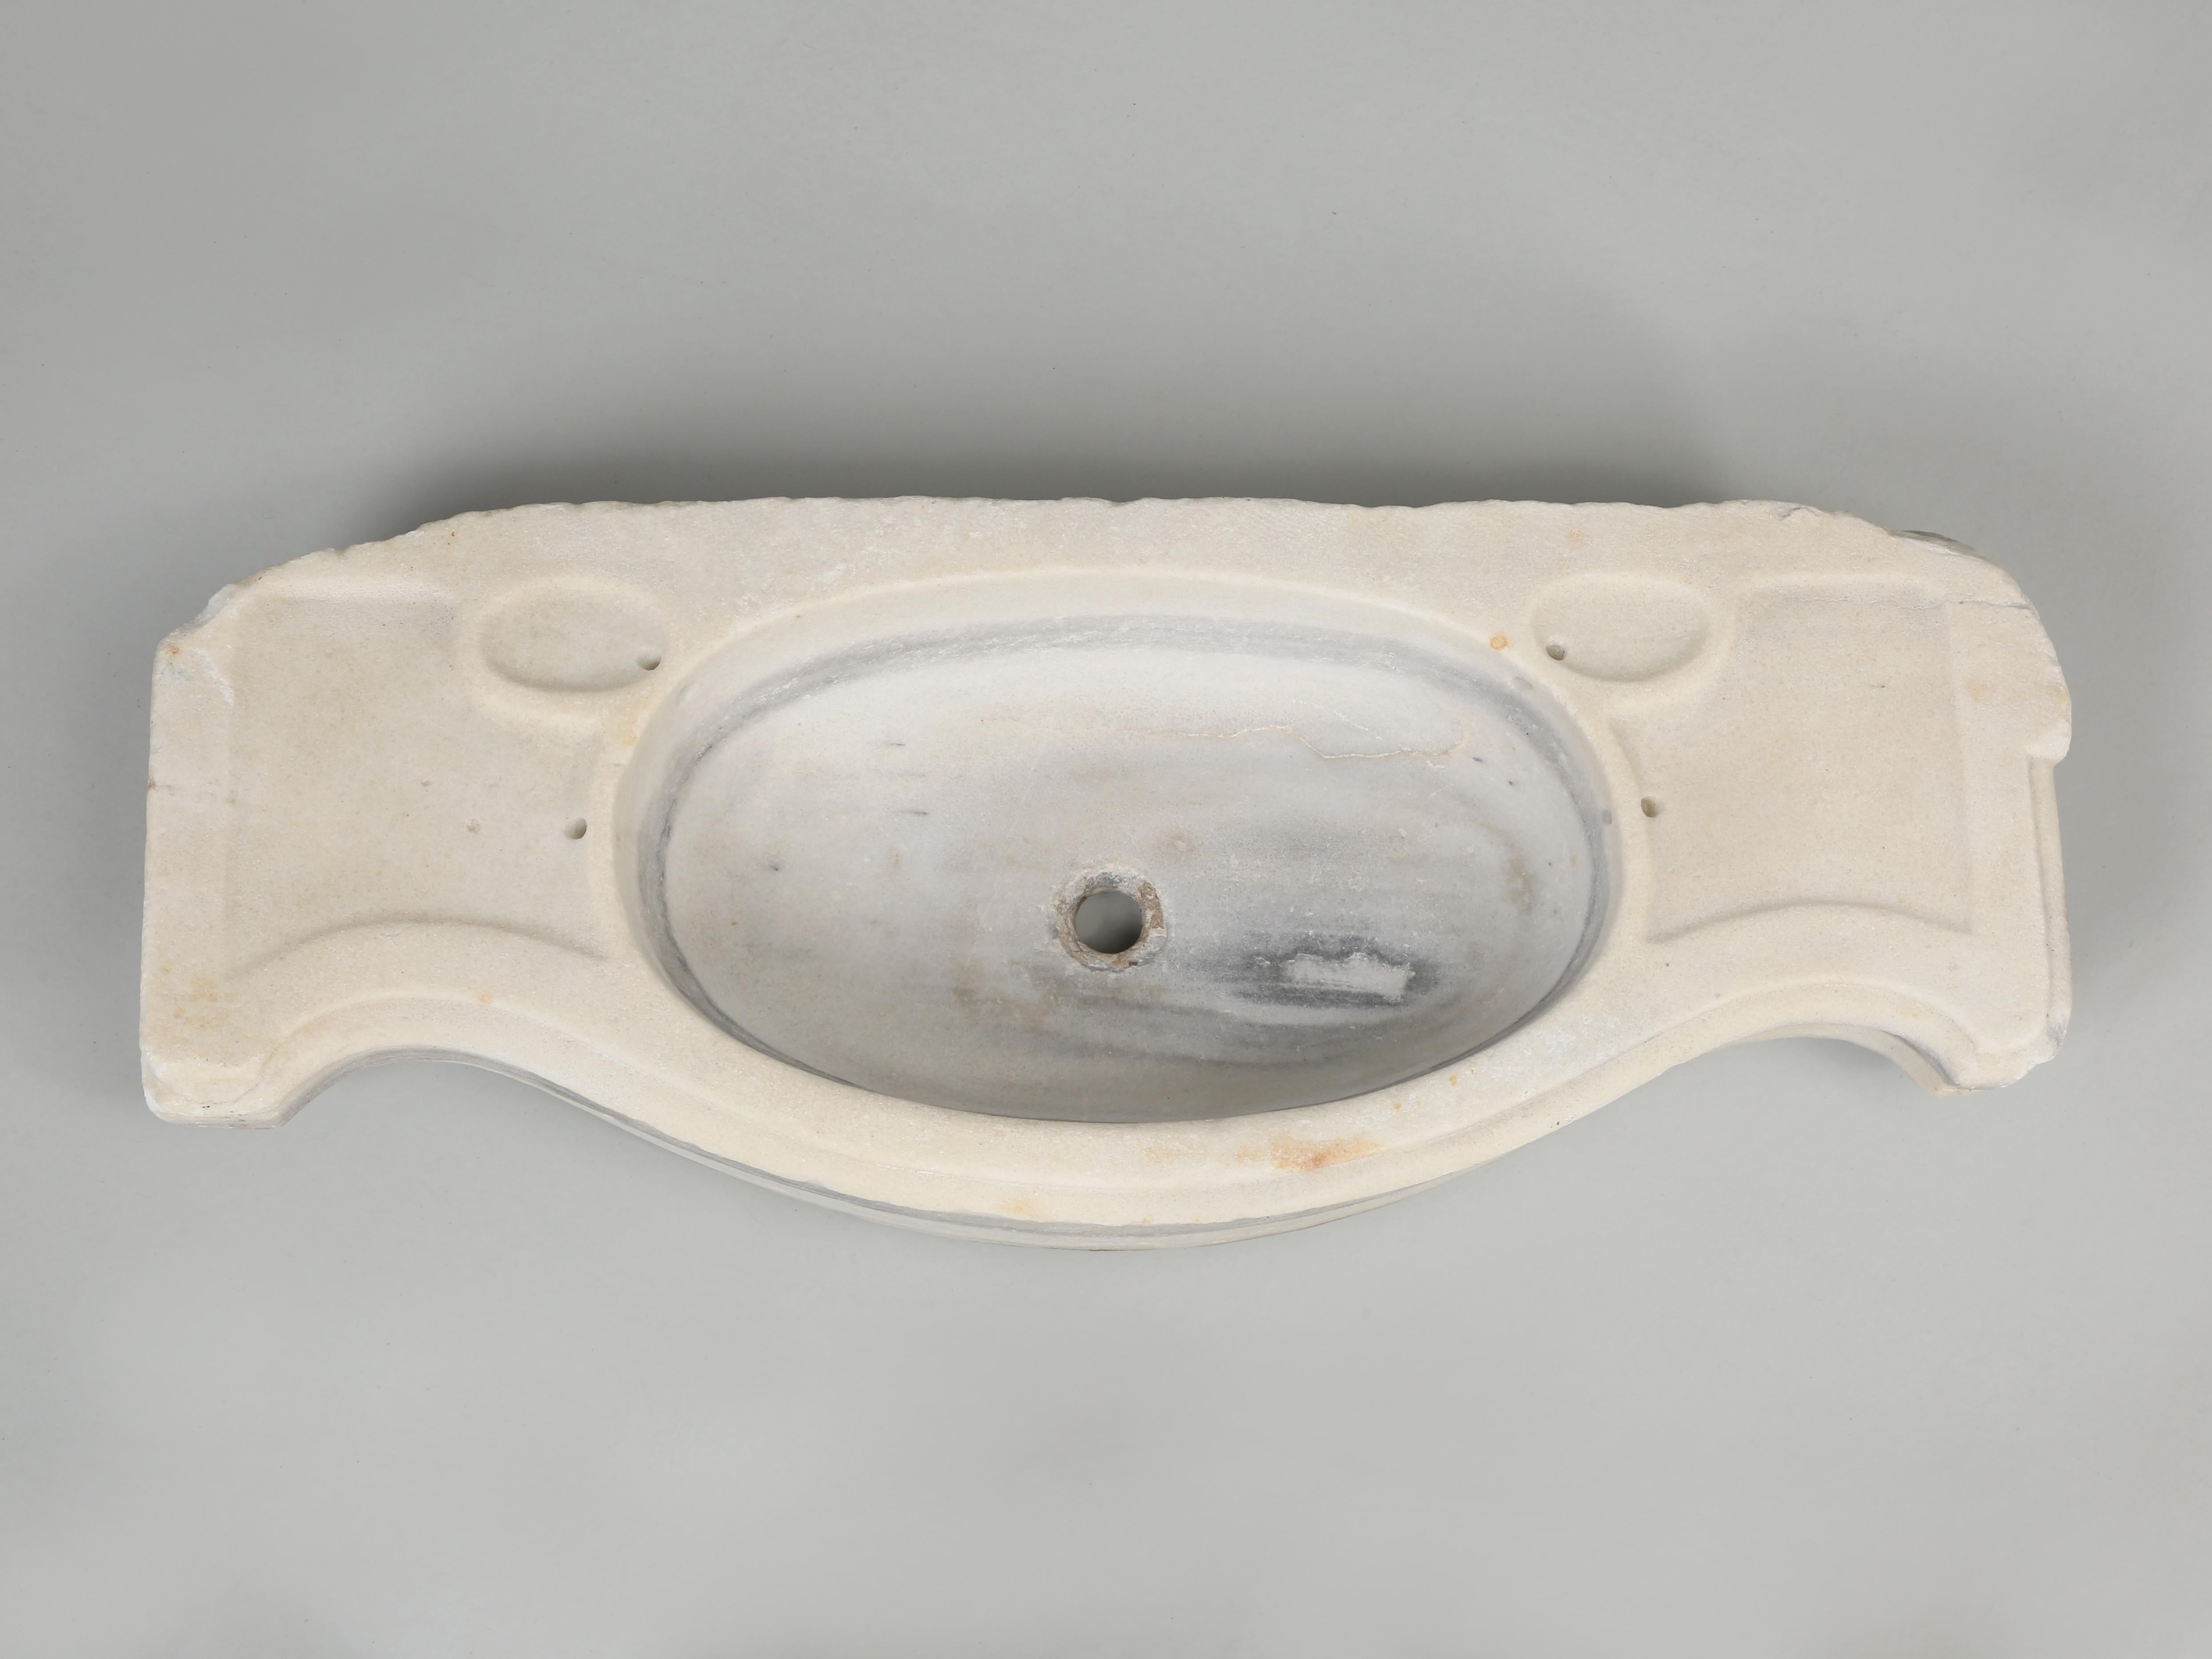 Hand-Carved Antique French Carrara Marble Sink Idea for Small Powder Room, c1800's